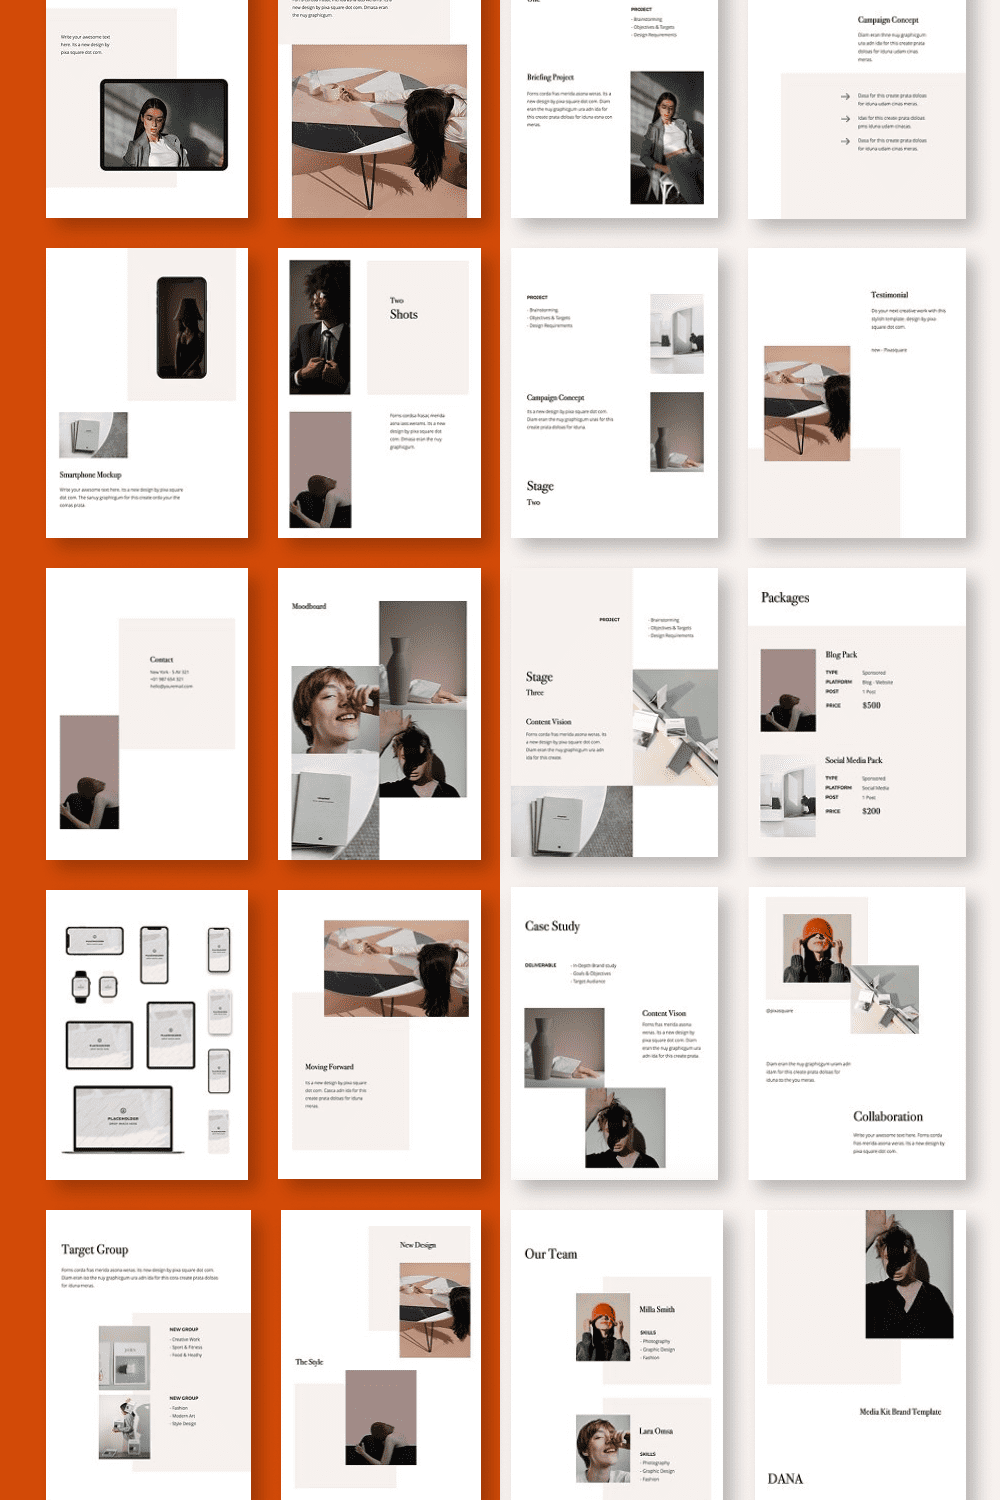 The template is perfect for a startup portfolio or modeling / design agency.